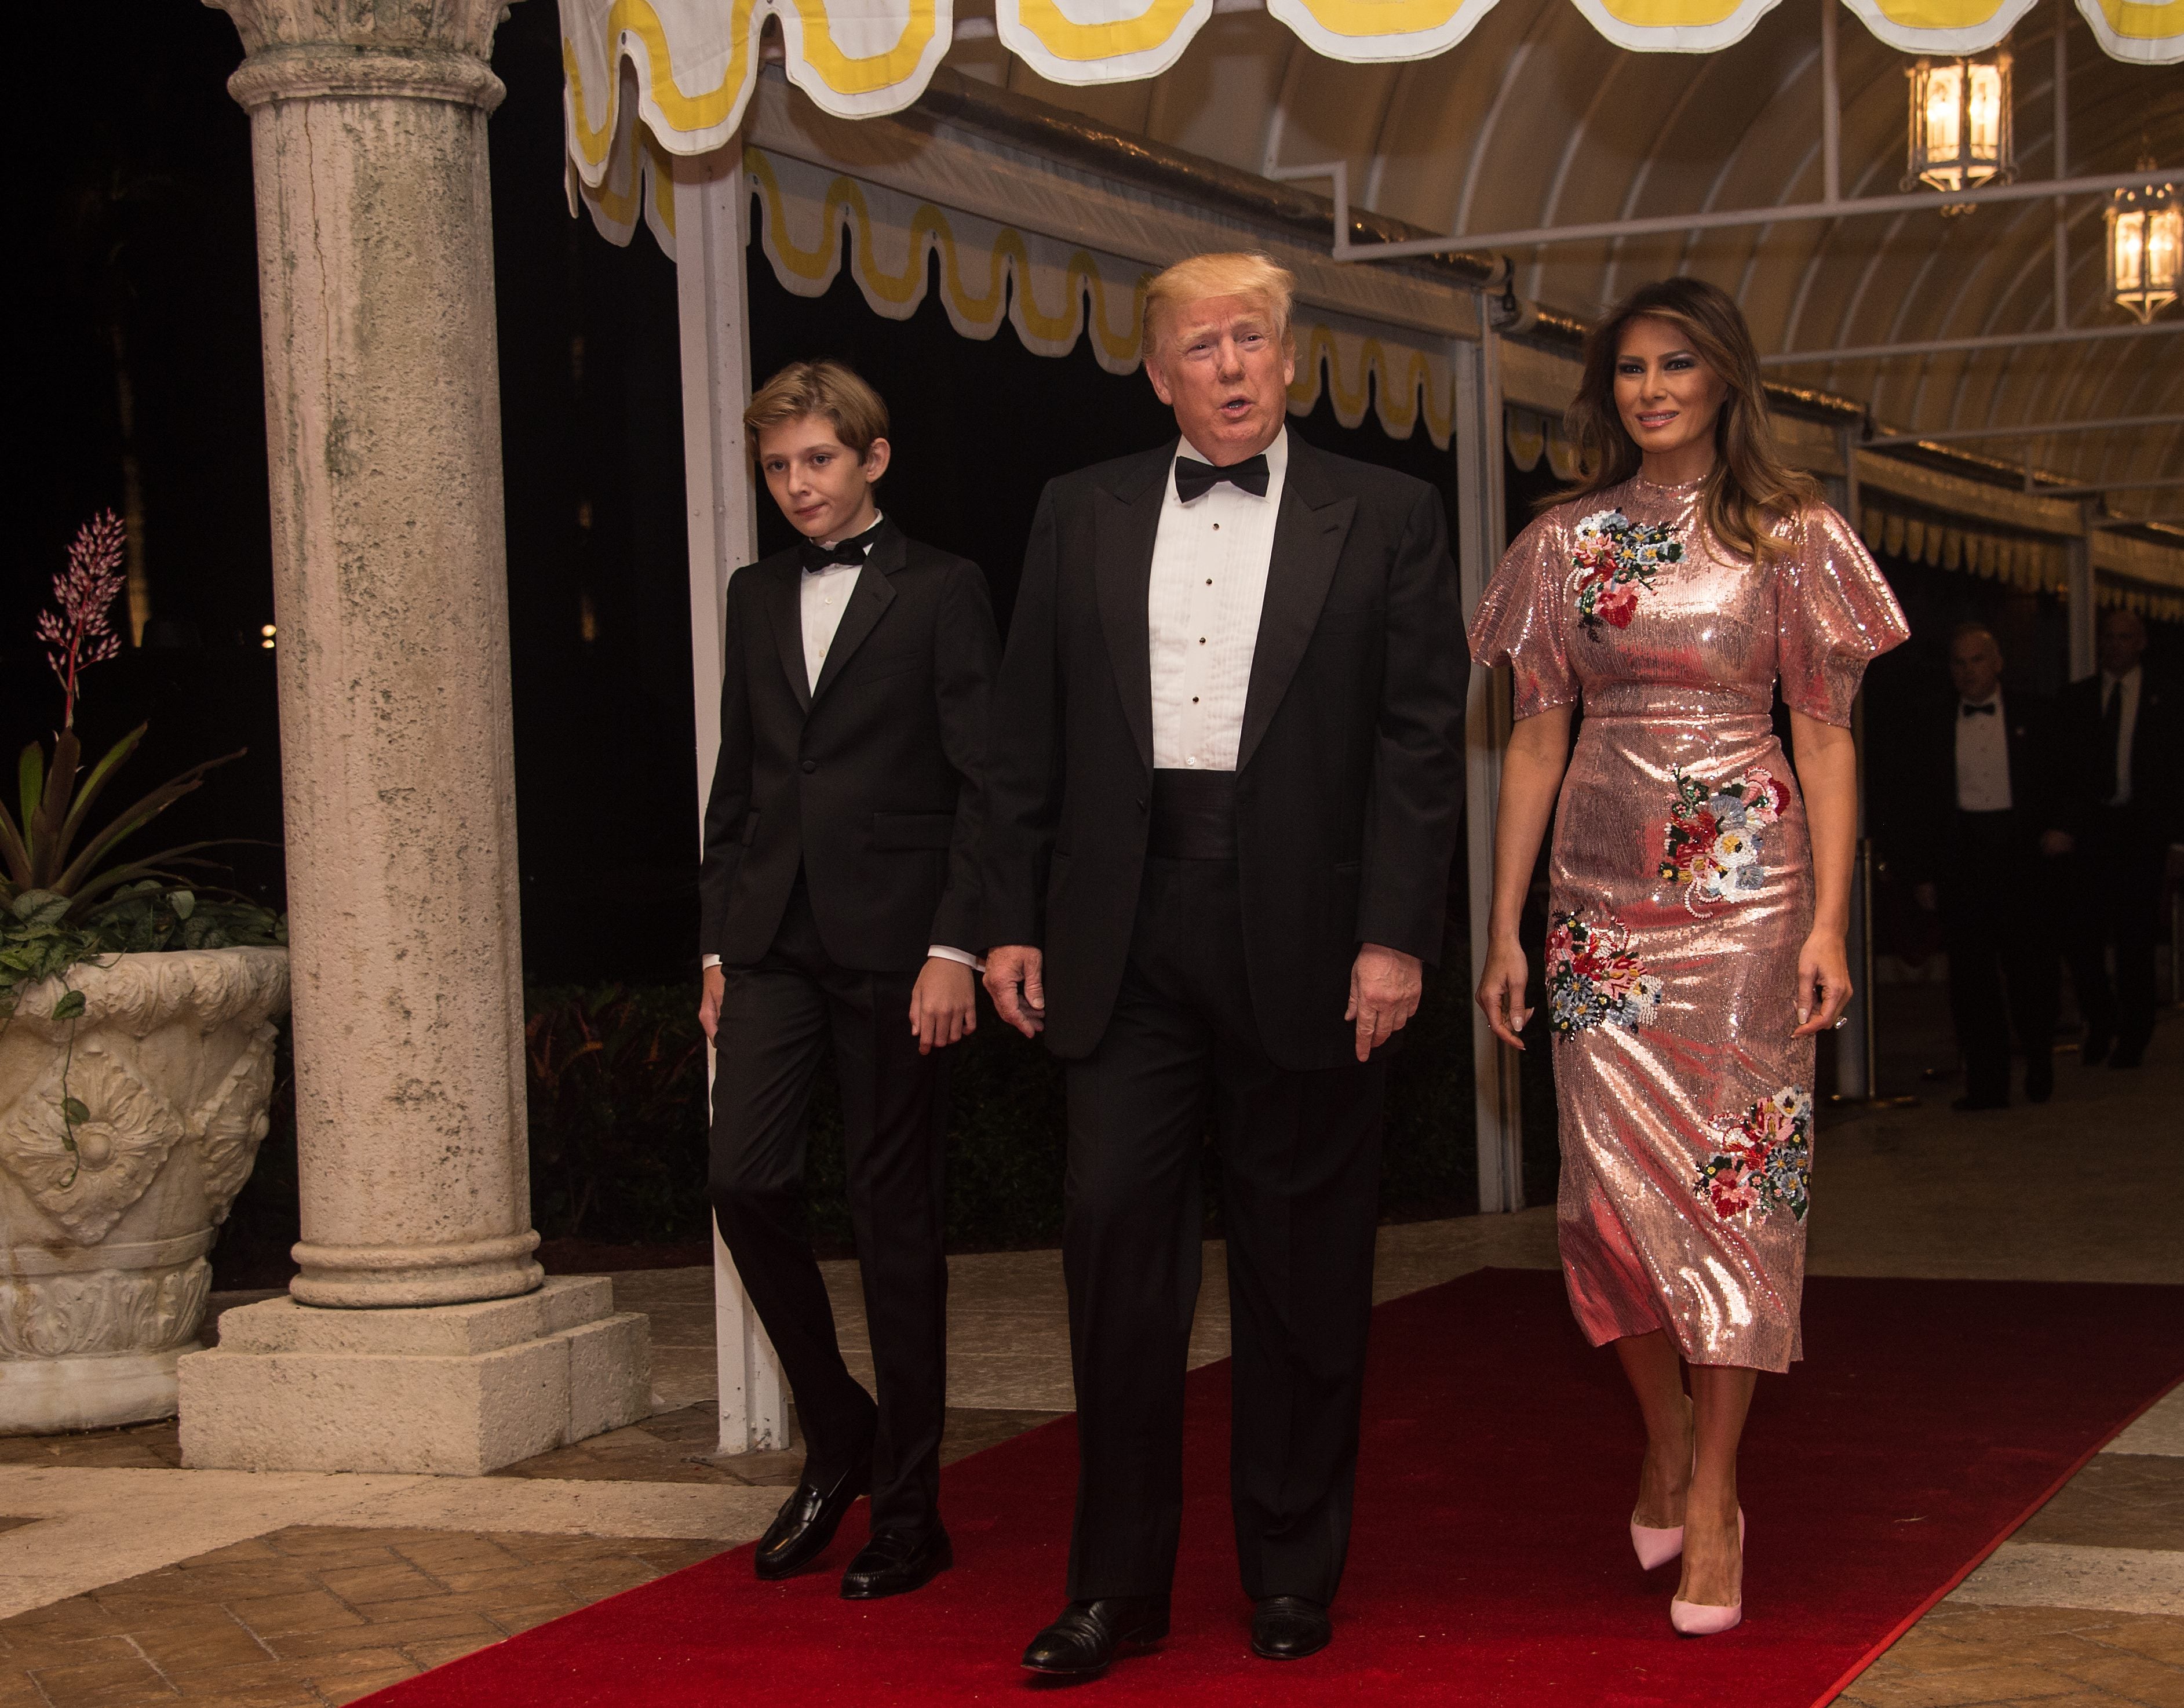 File Image: Donald Trump and first lady Melania Trump at Mar-a-Lago resort in Palm Beach, Florida, on December 31, 2017 for New Year bash. Trump’s New Year’s Eve parties have been a tradition for him predating his presidential term.&nbsp;